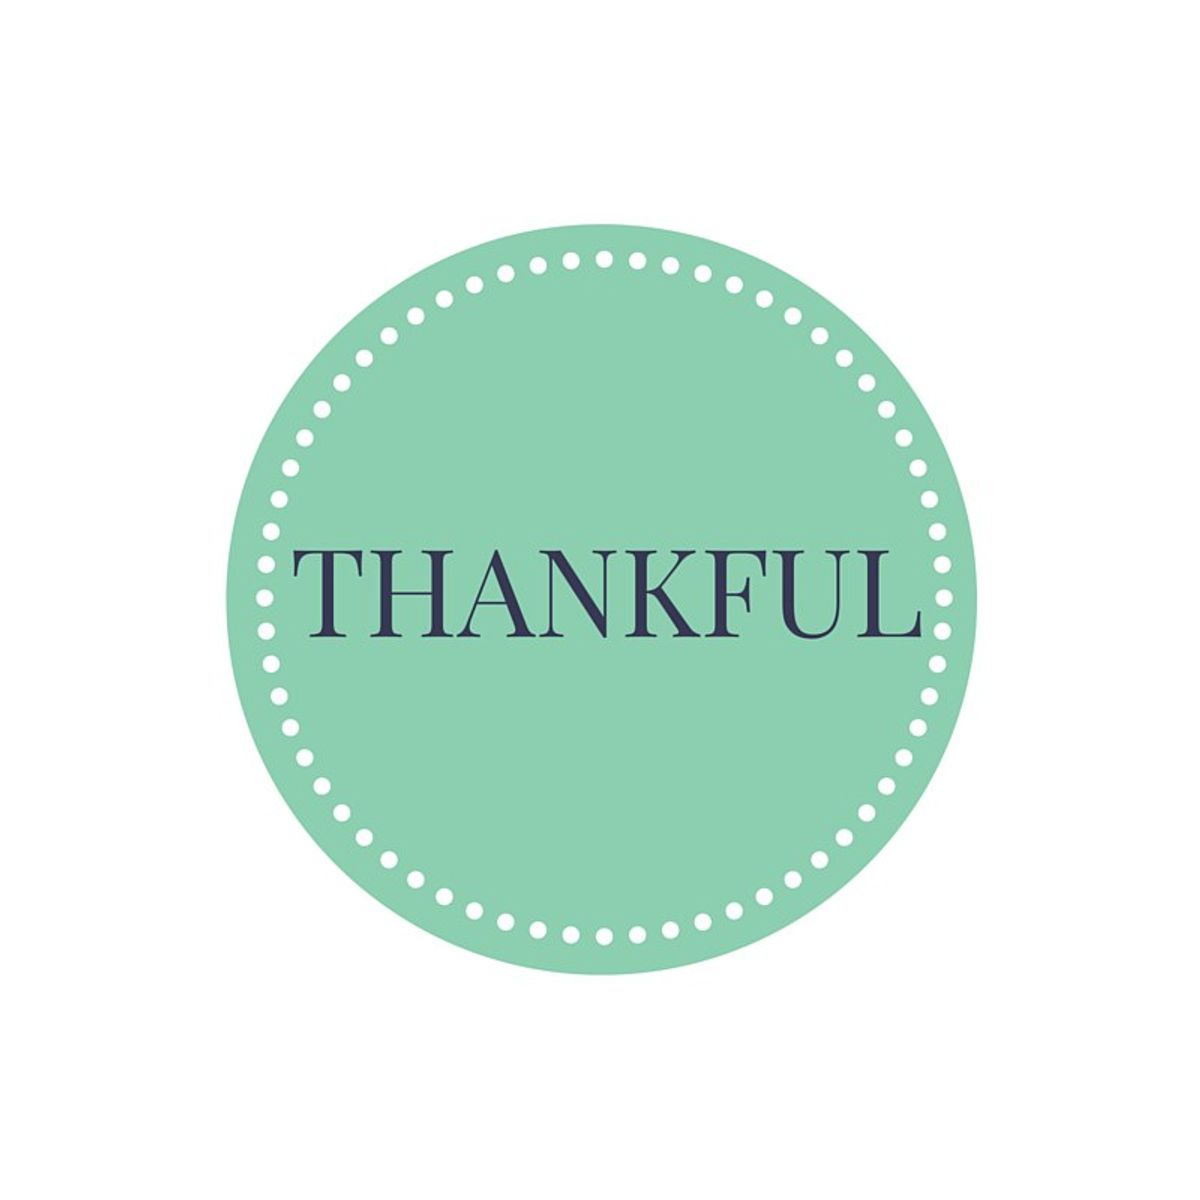 6 Things We're Thankful For